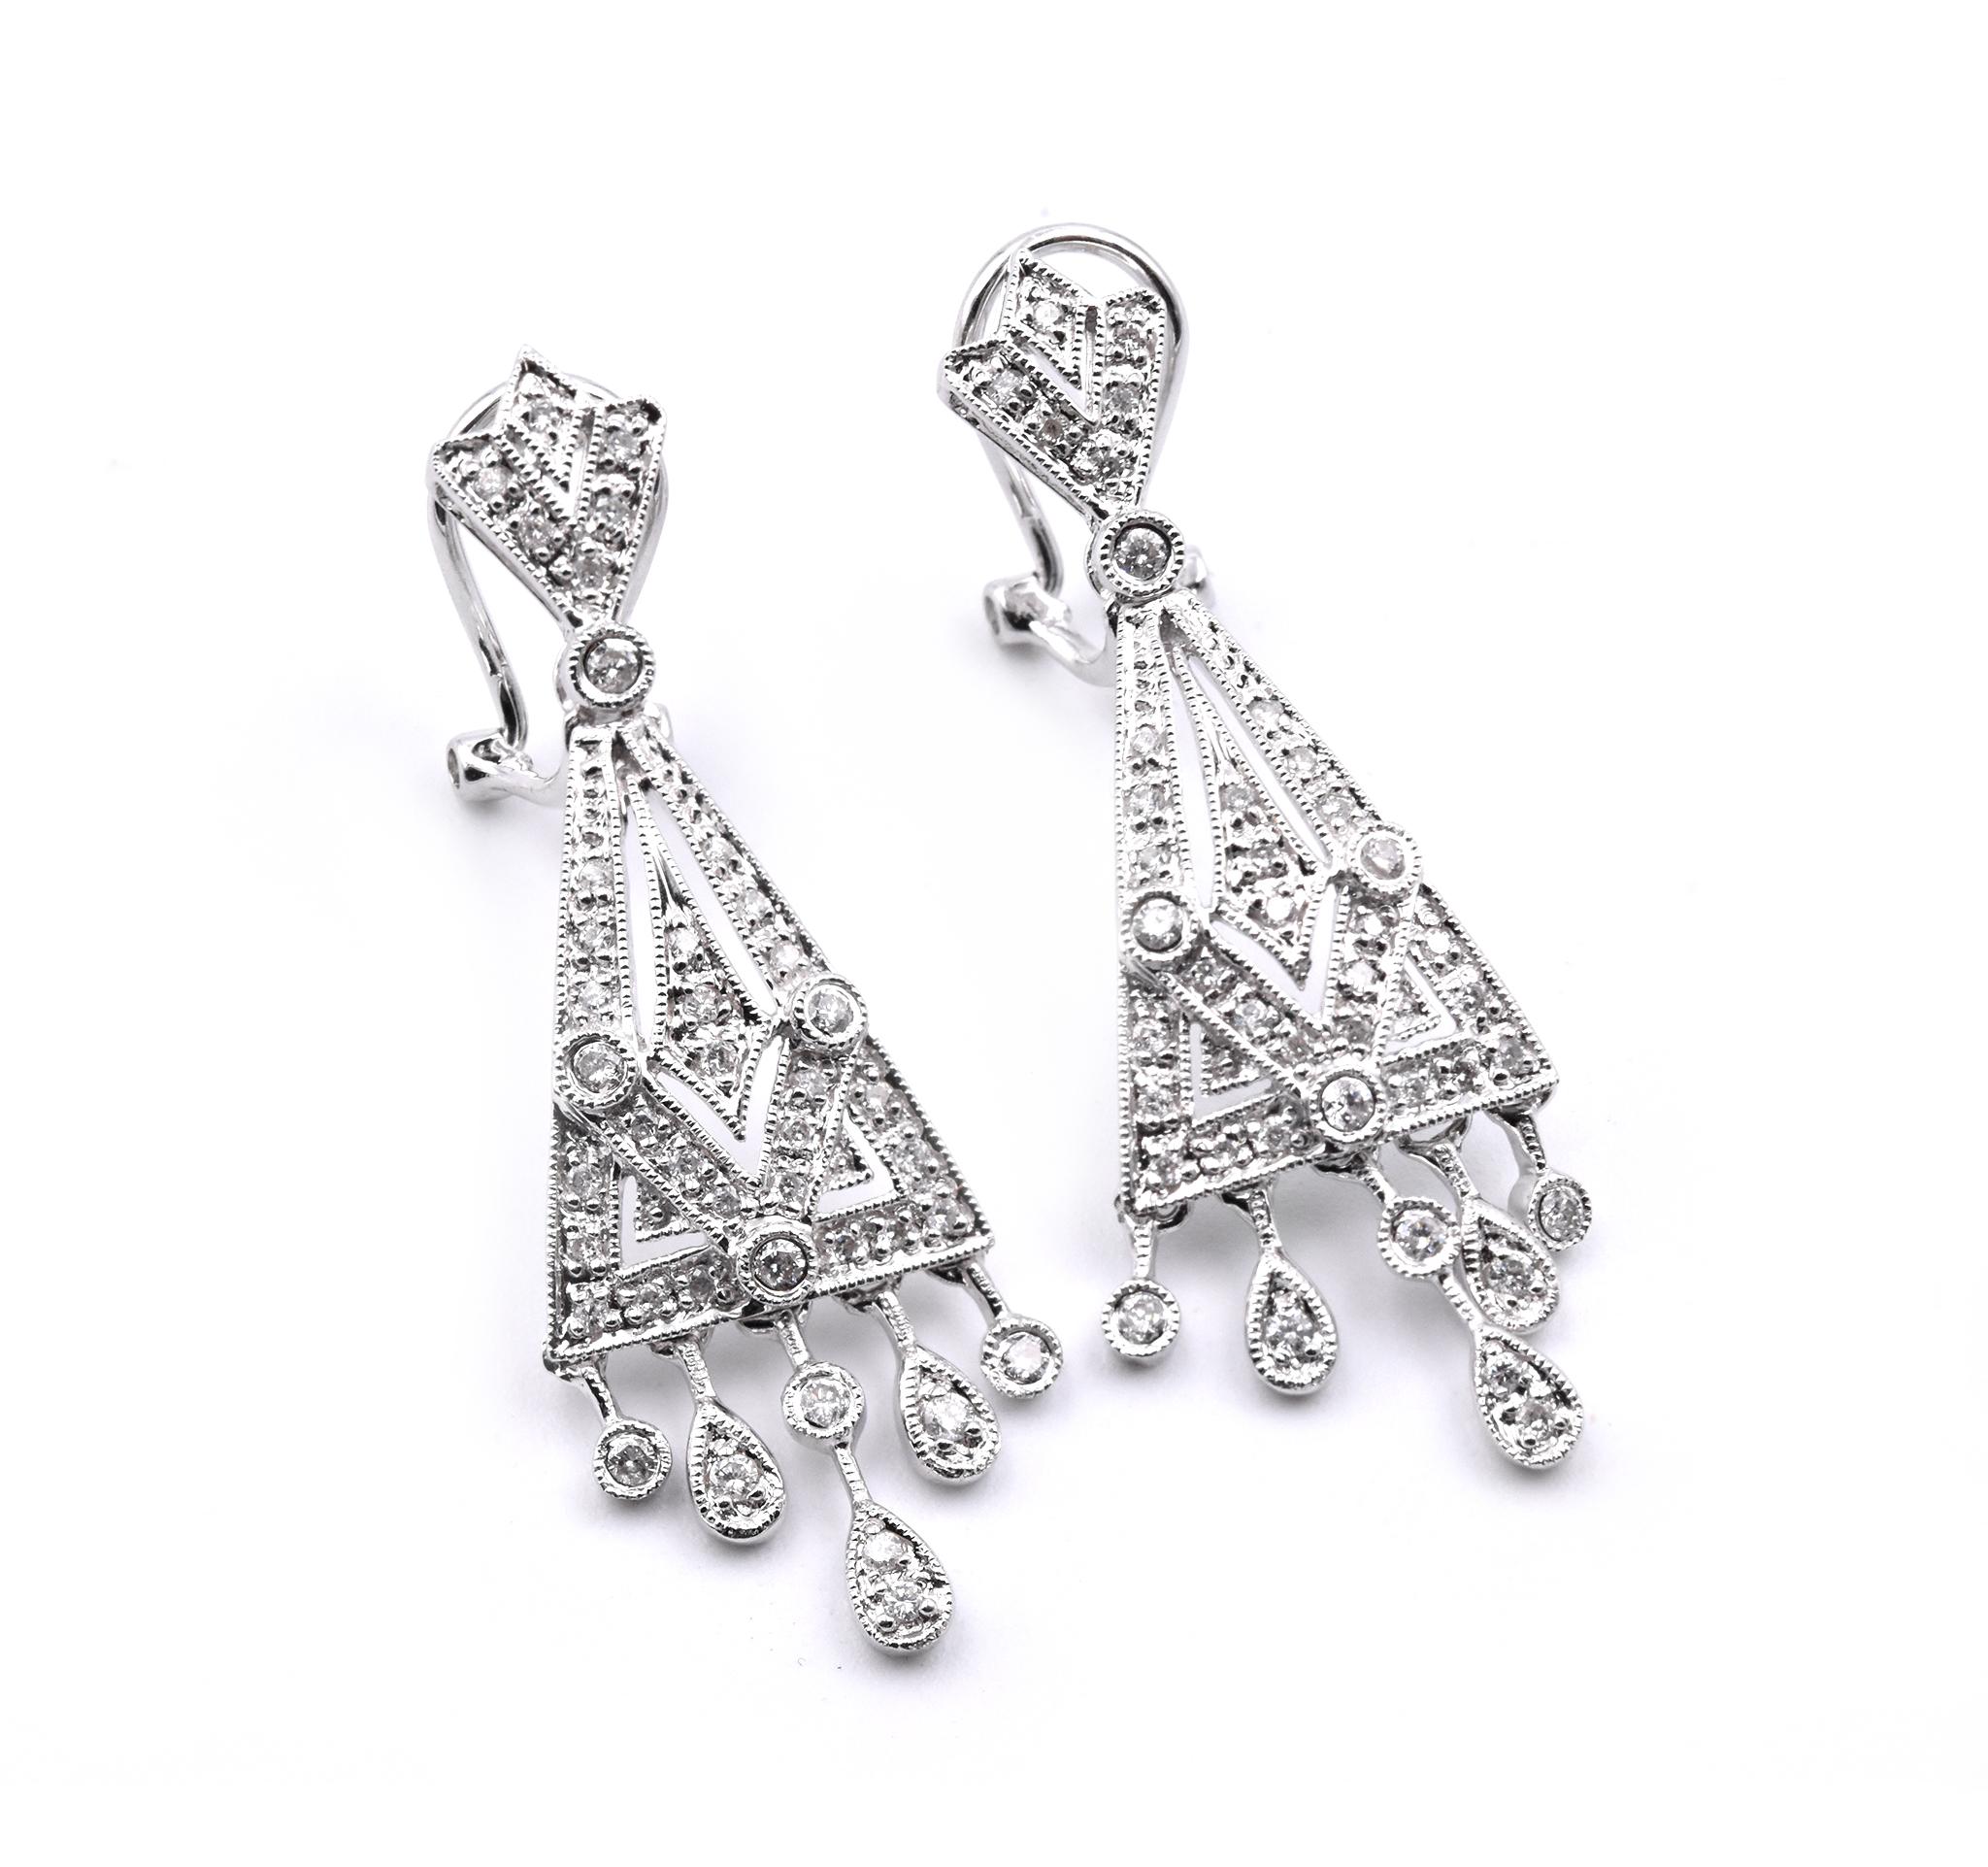 Material: 14K white gold
Diamonds: 84 round cuts = .53cttw
Color: G
Clarity: VS
Dimensions: earrings measure 37.5mm in length and 12.6mm in width 
Fastenings: posts with omega backs
Weight: 5.74 grams